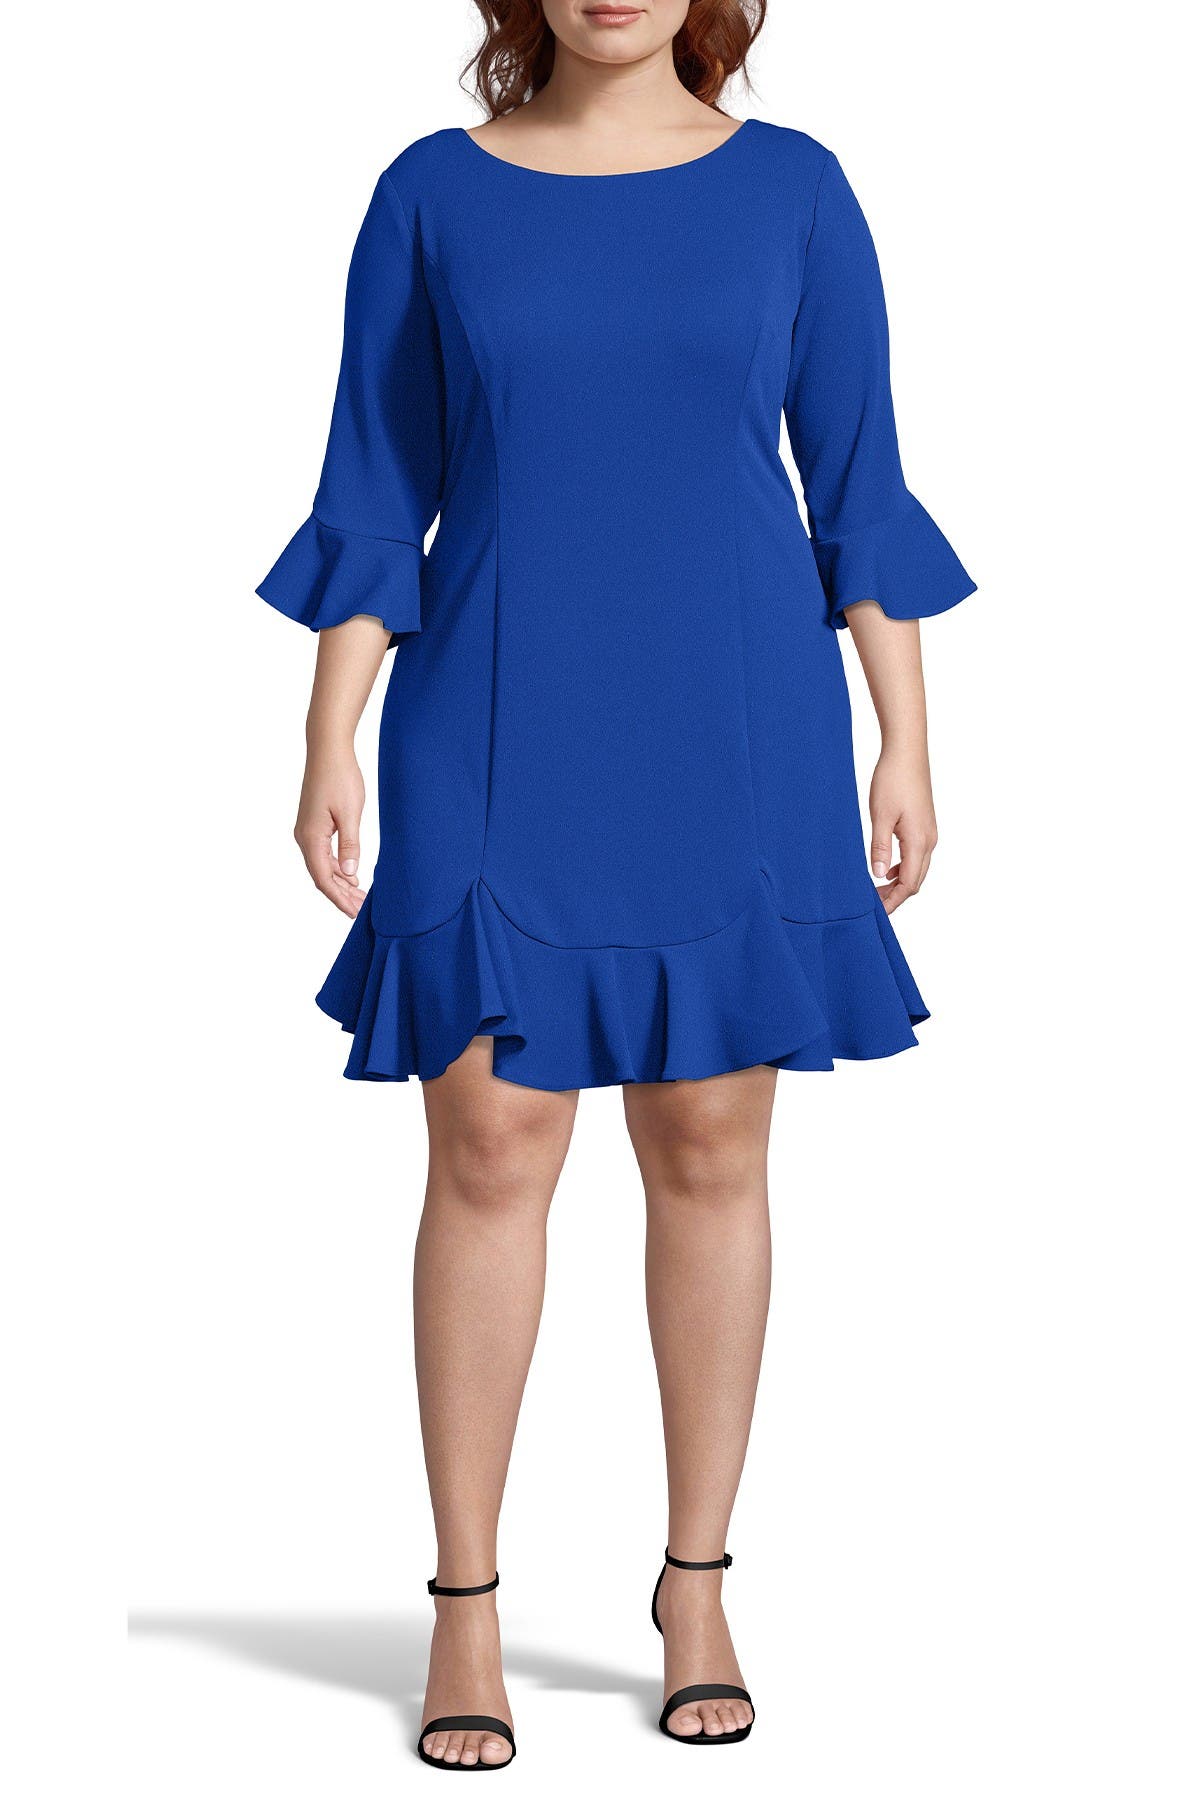 Adrianna Papell Crepe Ruffled Sheath Dress In Blue Sphre